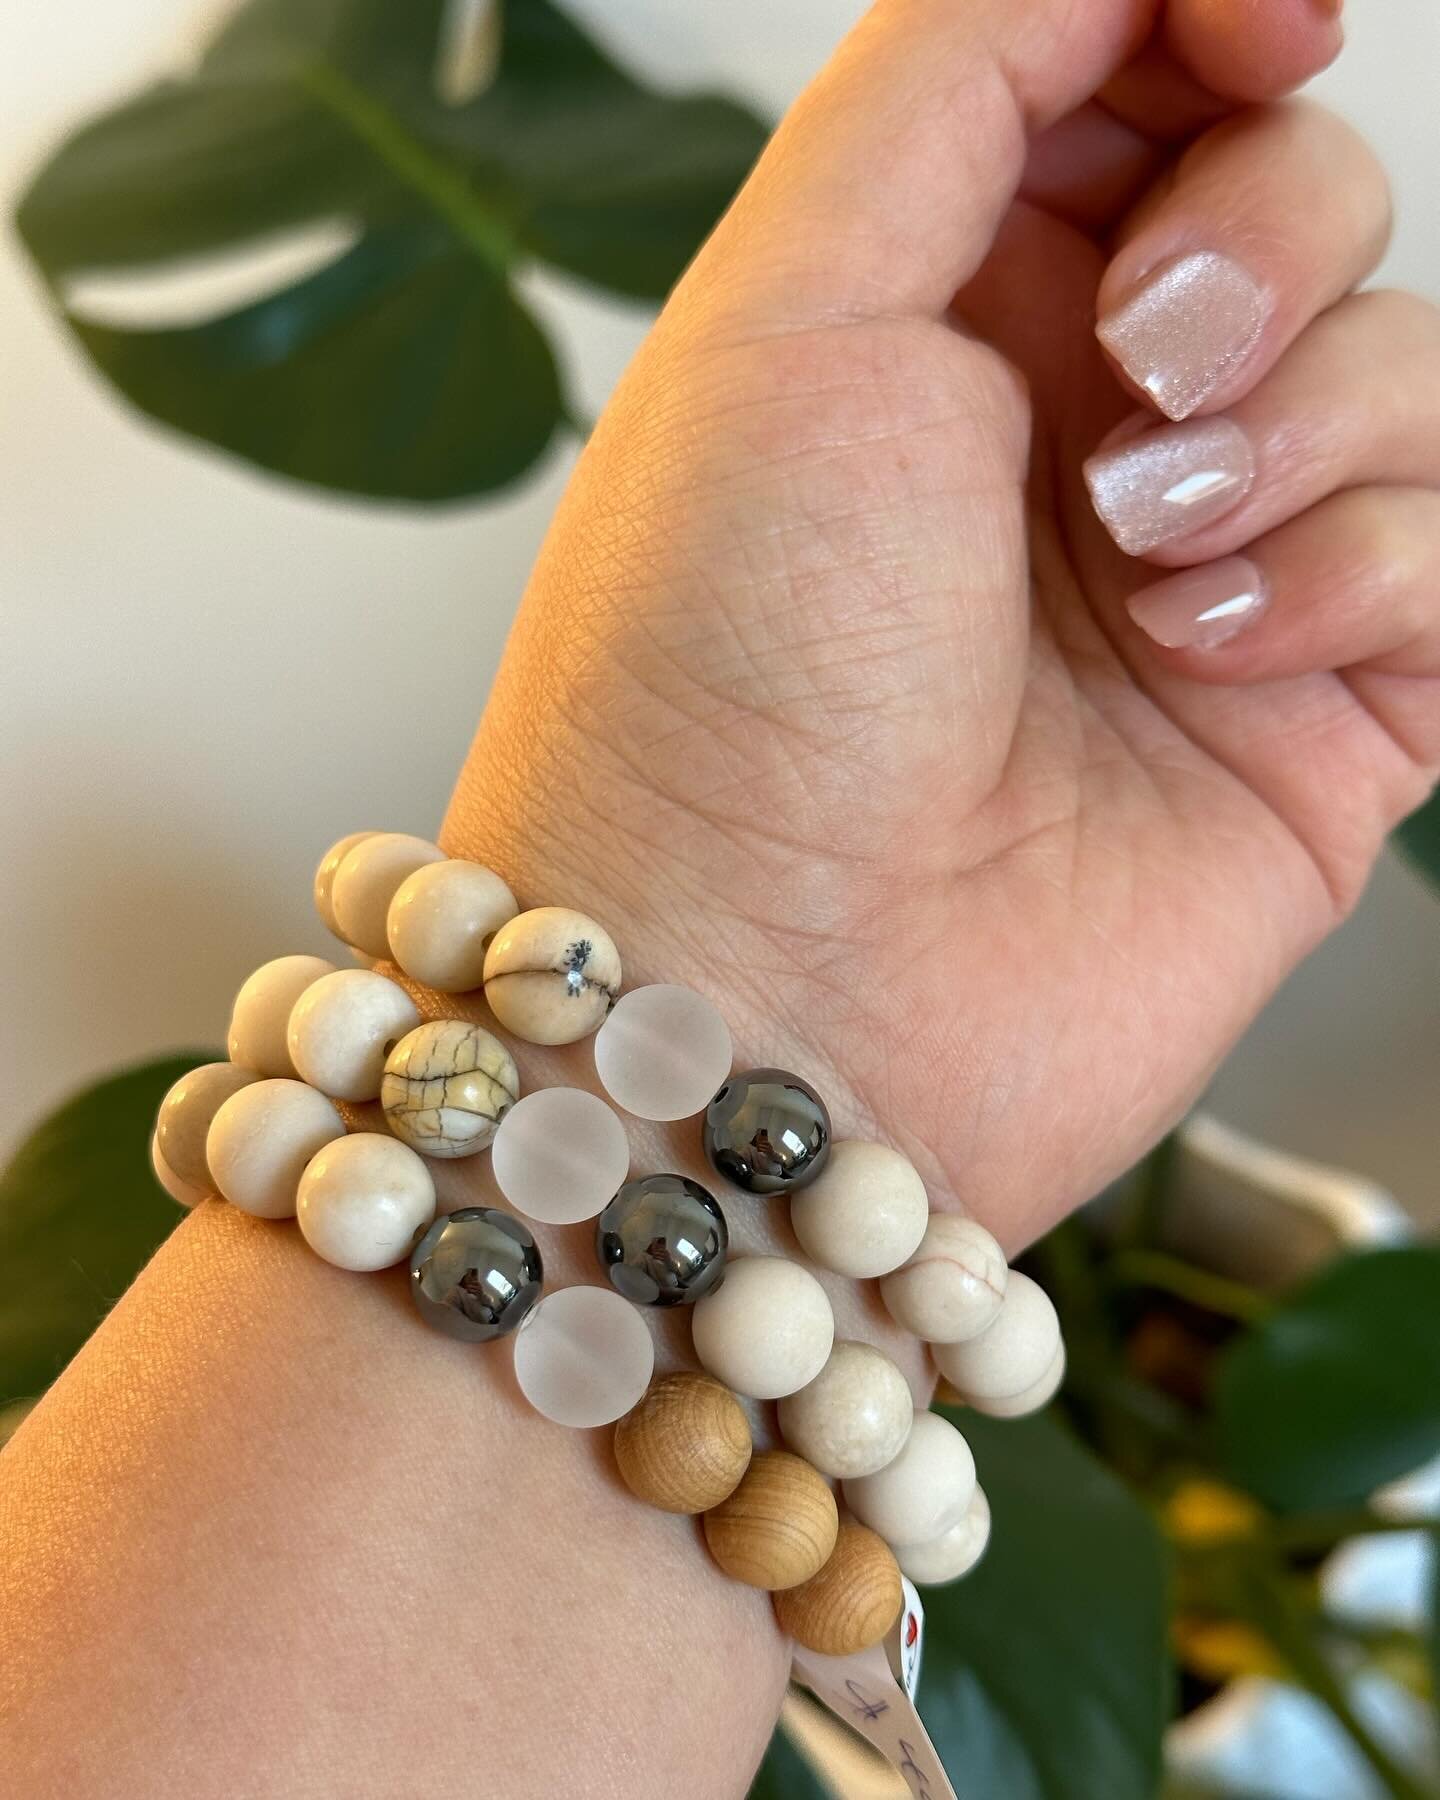 Special edition bracelets. Not available on website. $45 each including shipping. Fits most wrist sizes. DM to claim #handmade #handmadejewelry #beadbracelets  #beads #madewithlove #jewelry #accessories #jasperstone